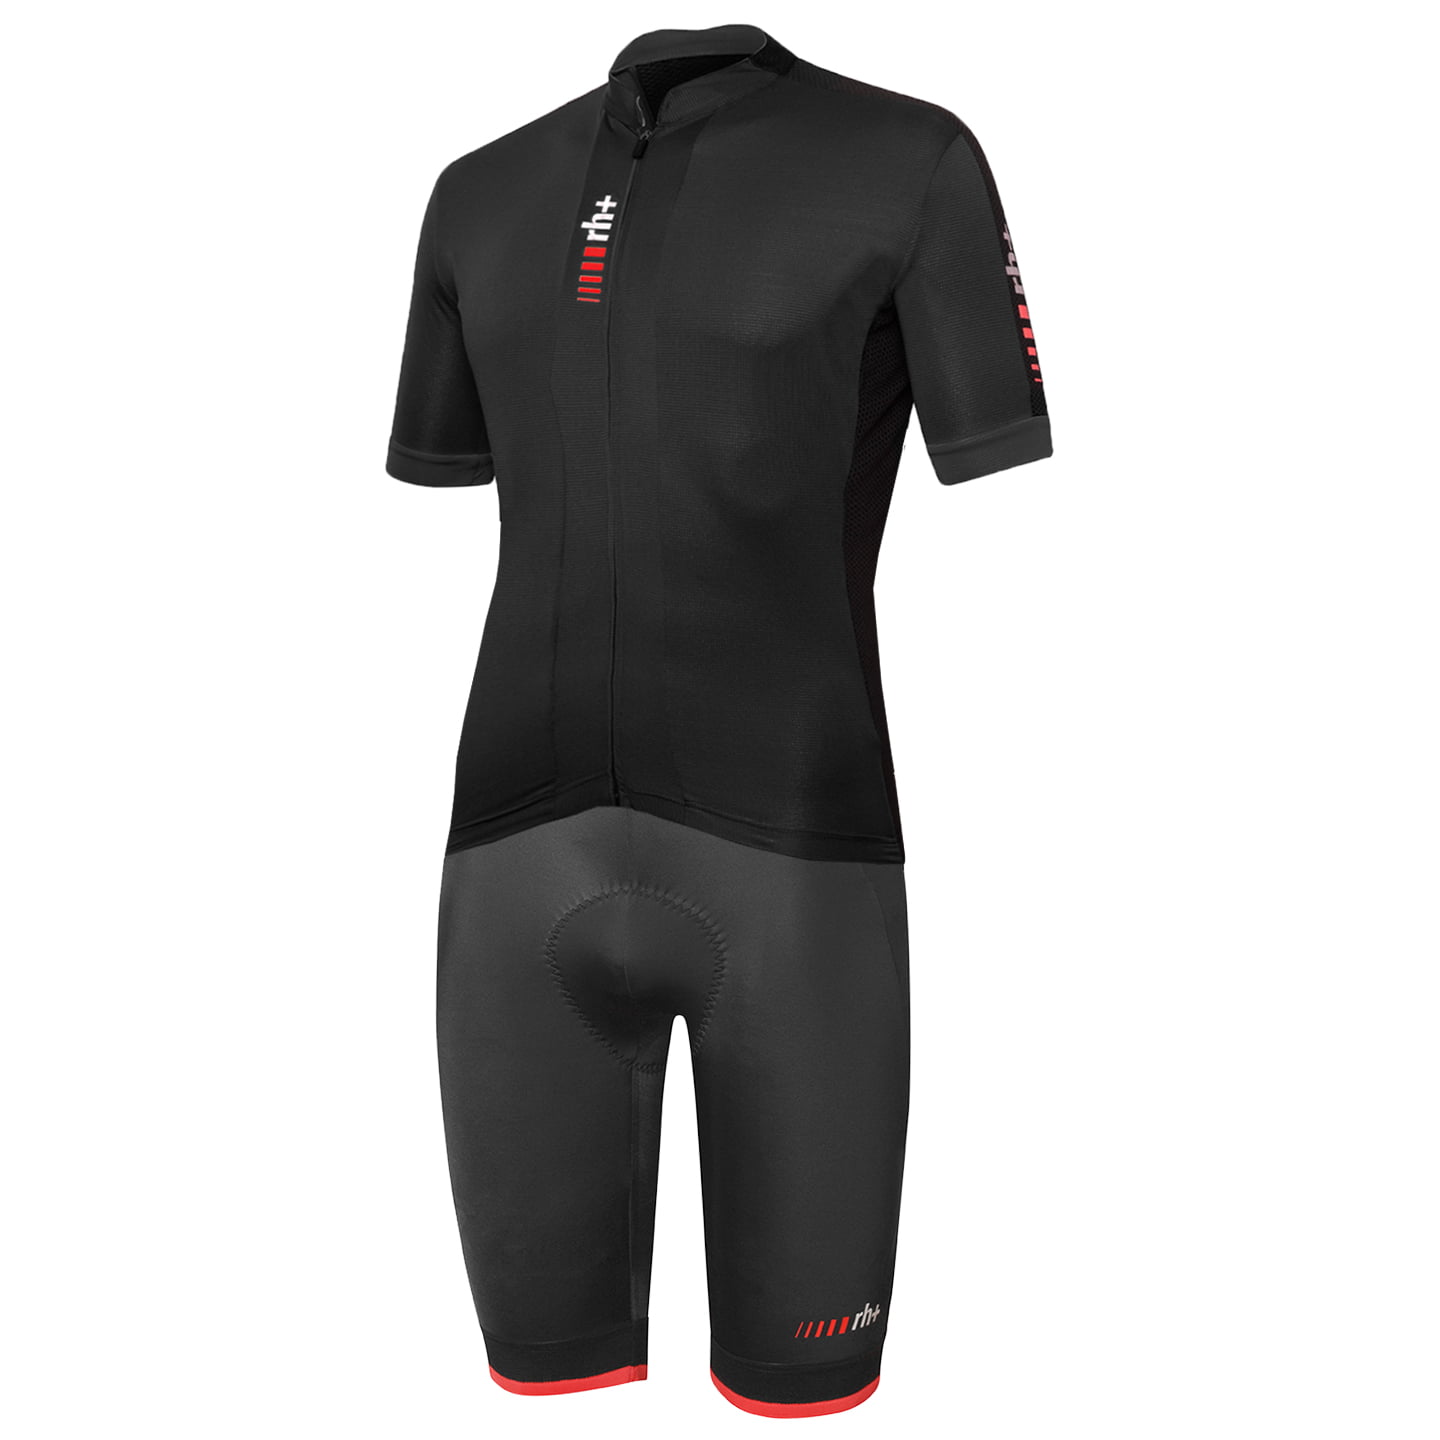 RH+ New Primo Set (cycling jersey + cycling shorts) Set (2 pieces), for men